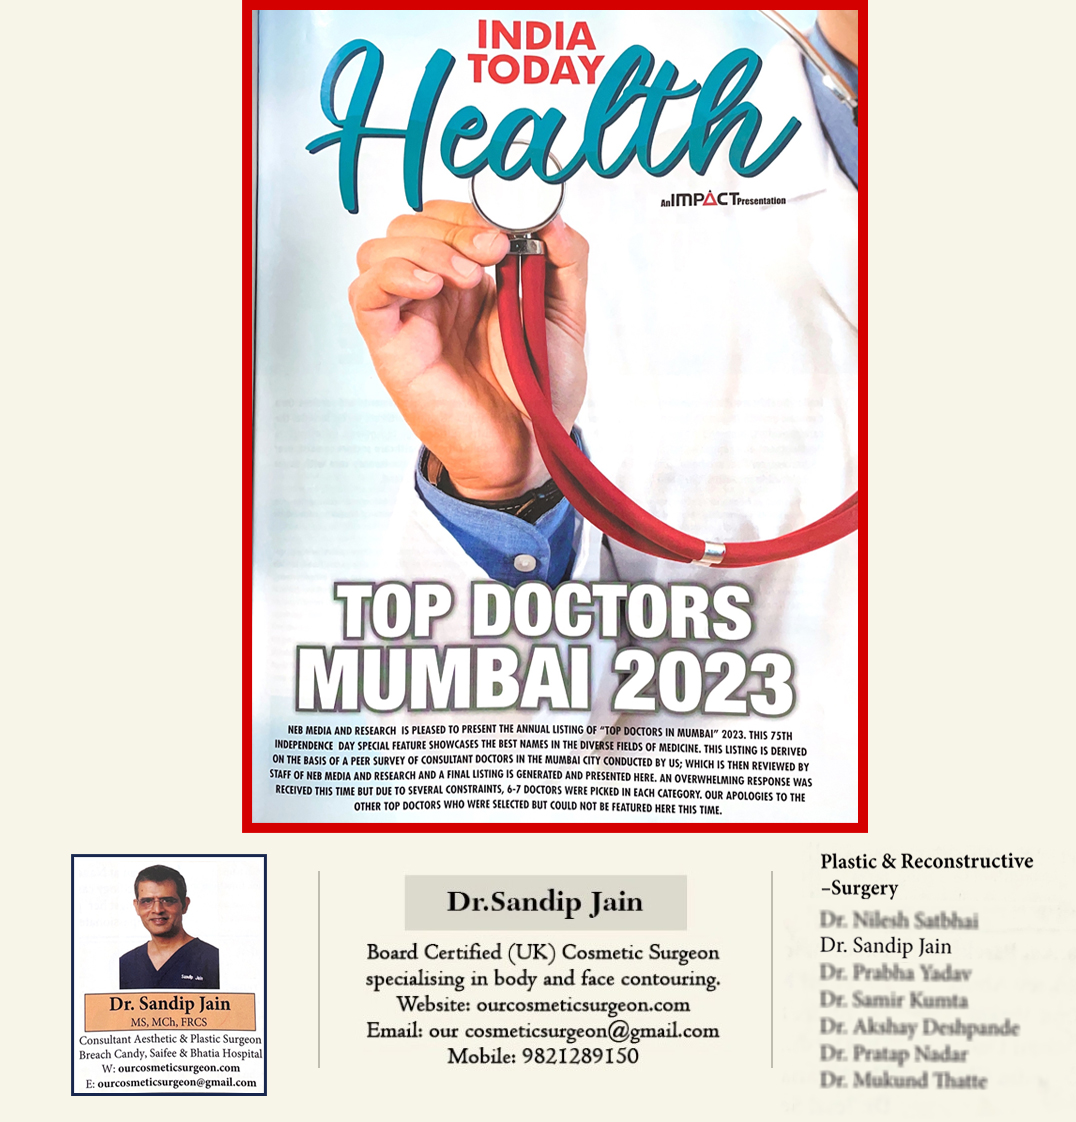 Top doctors Mumbai! 7th time running! Humbled to be on the list.